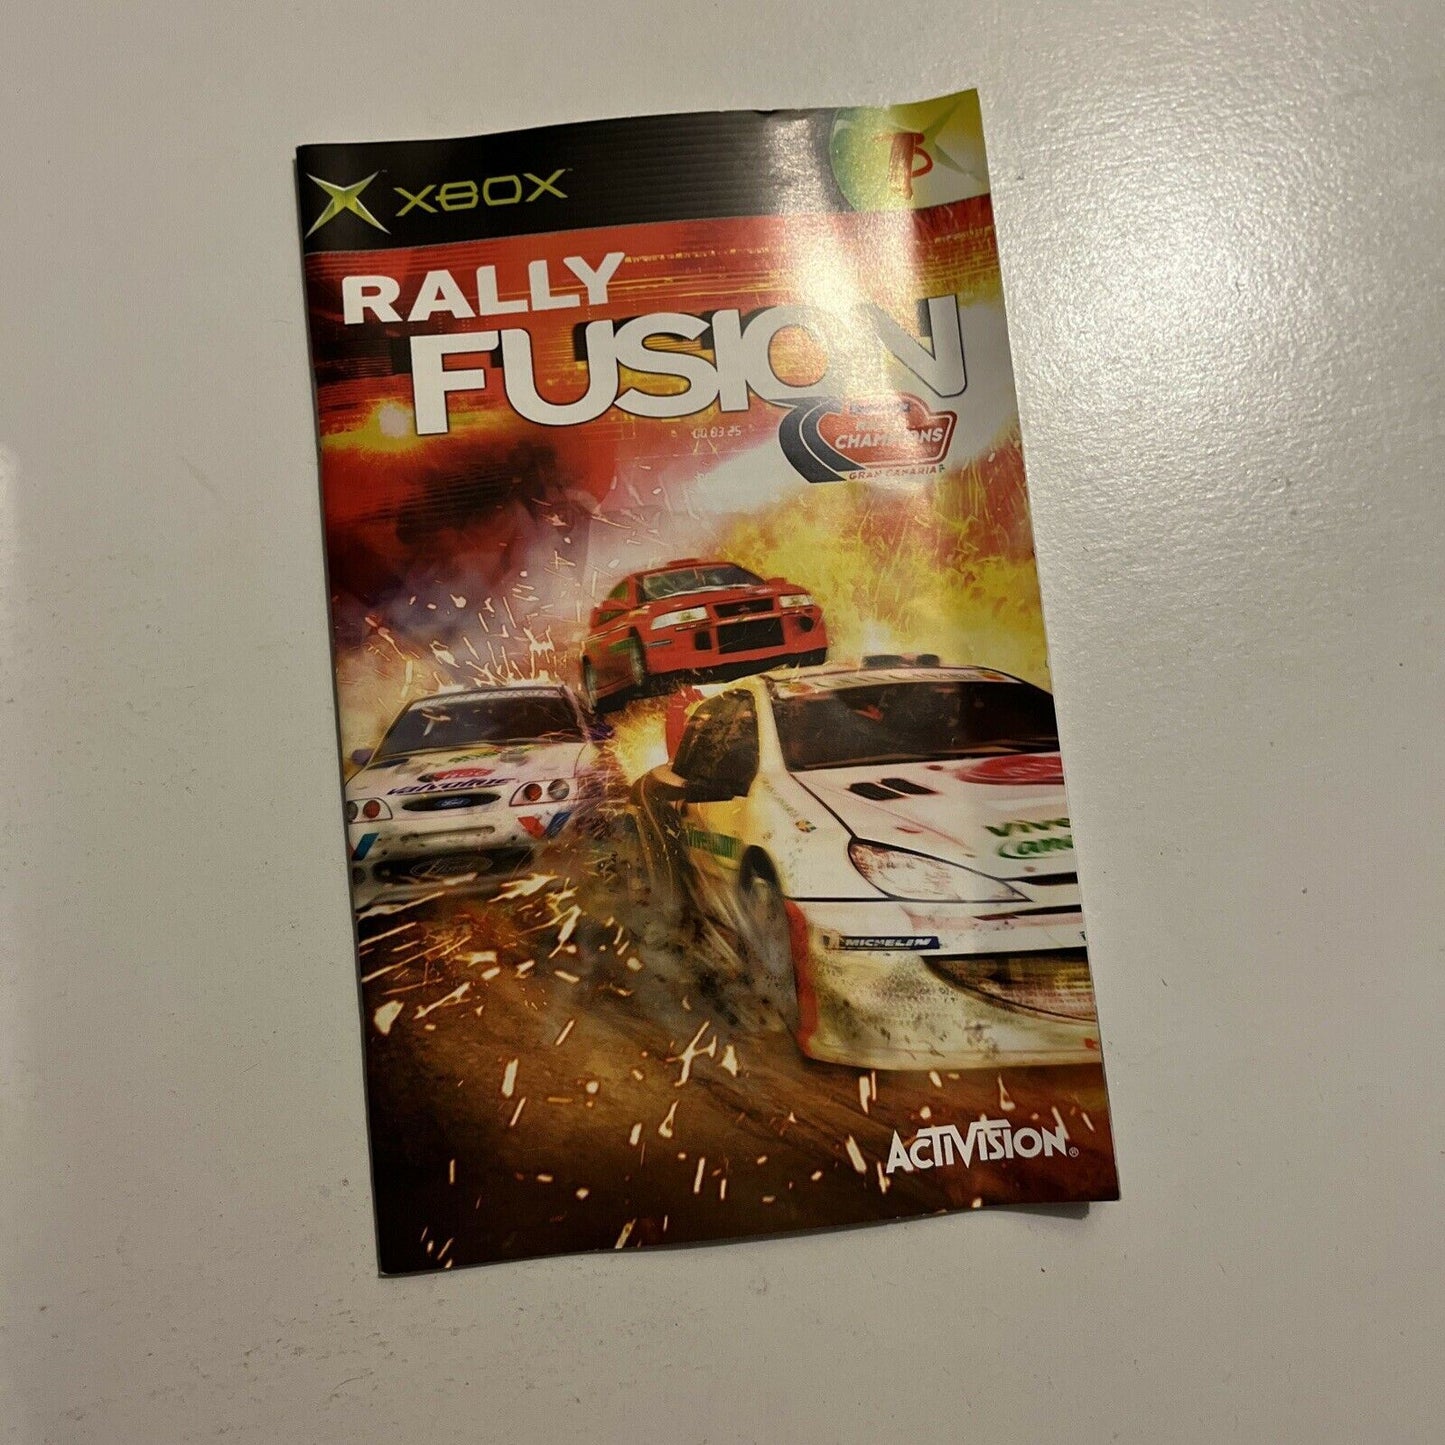 Rally Fusion: Race of Champions - Microsoft Xbox Original PAL Game With Manual